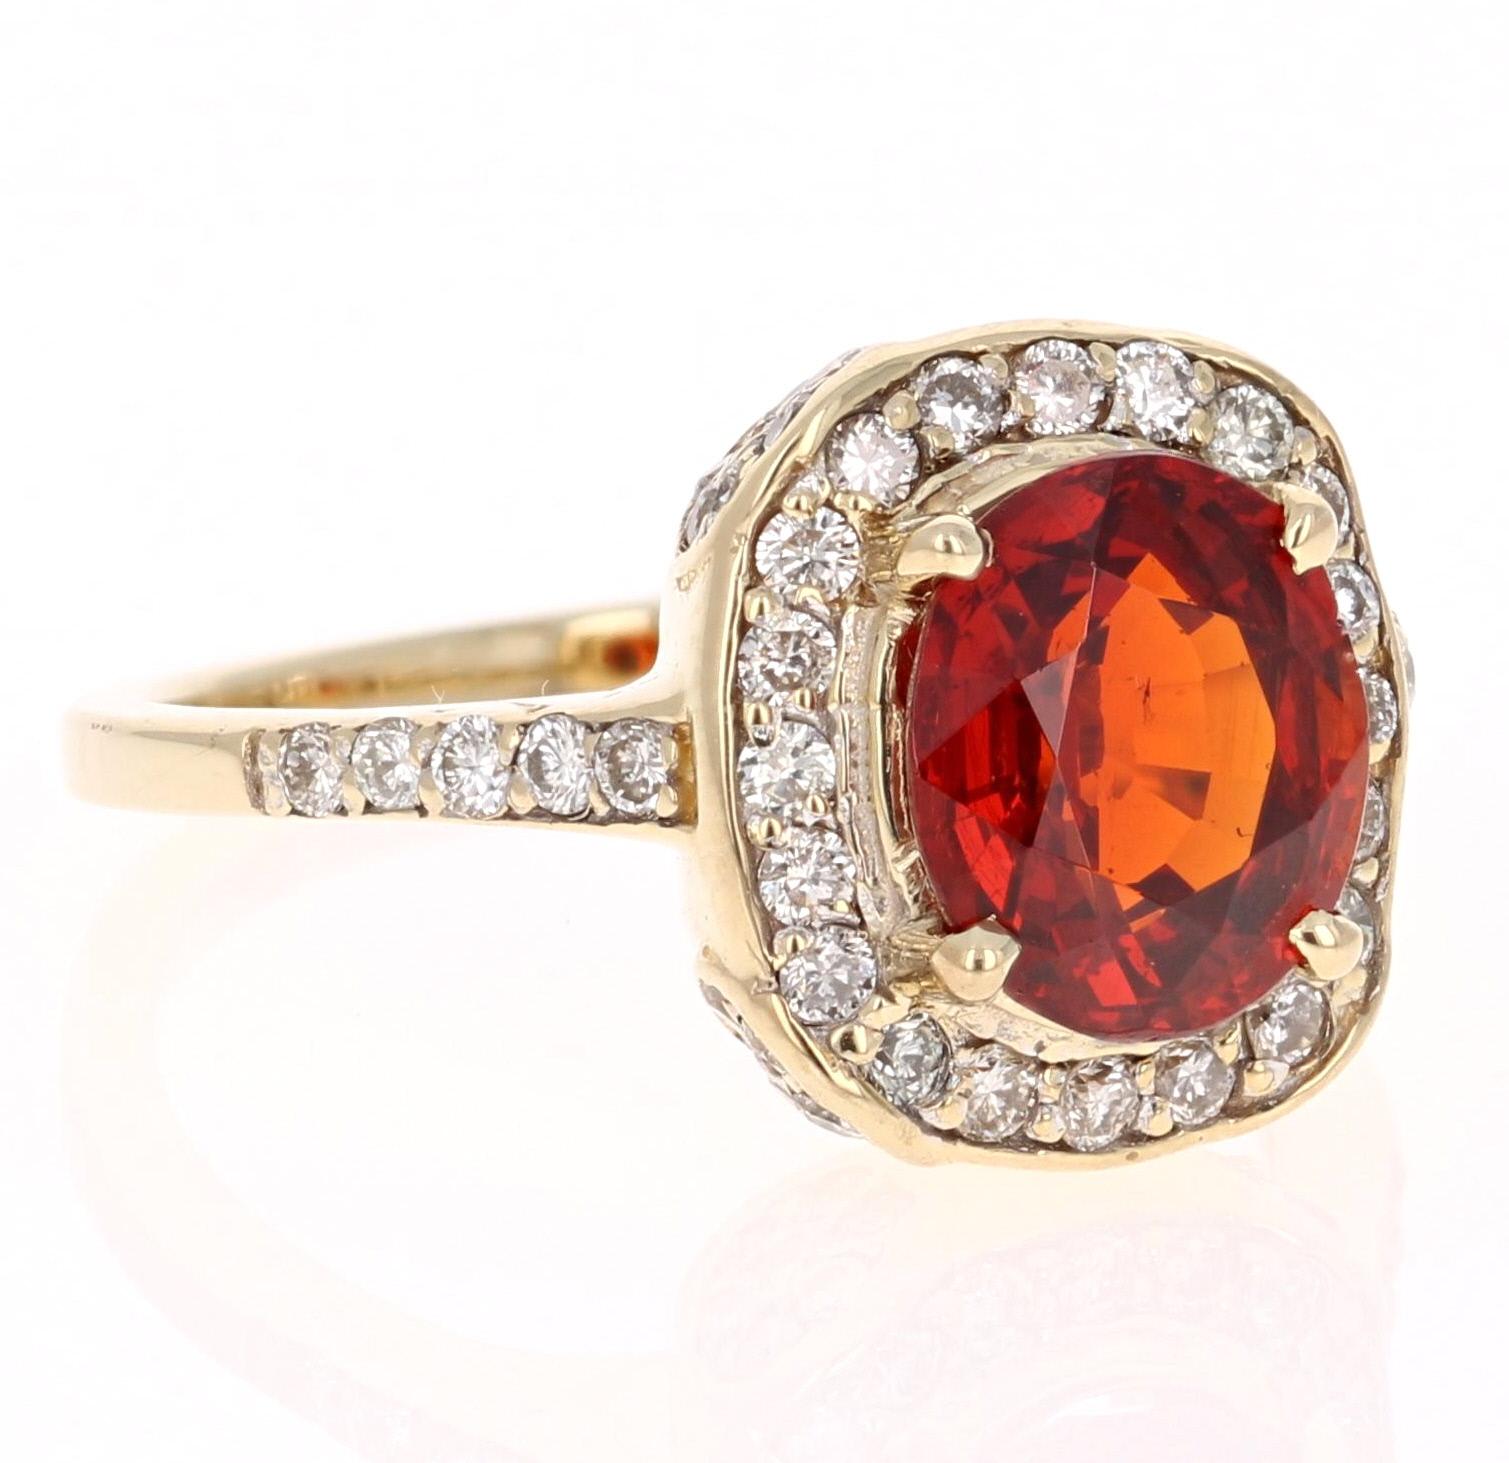 A gorgeous ring that can also be a stunning and unique engagement ring. This beautiful ring has a 2.77 carat Oval Cut Spessartine. A Spessartine is a natural stone that is a part of the Garnet family of stones. 
It is surrounded by 58 Round Cut